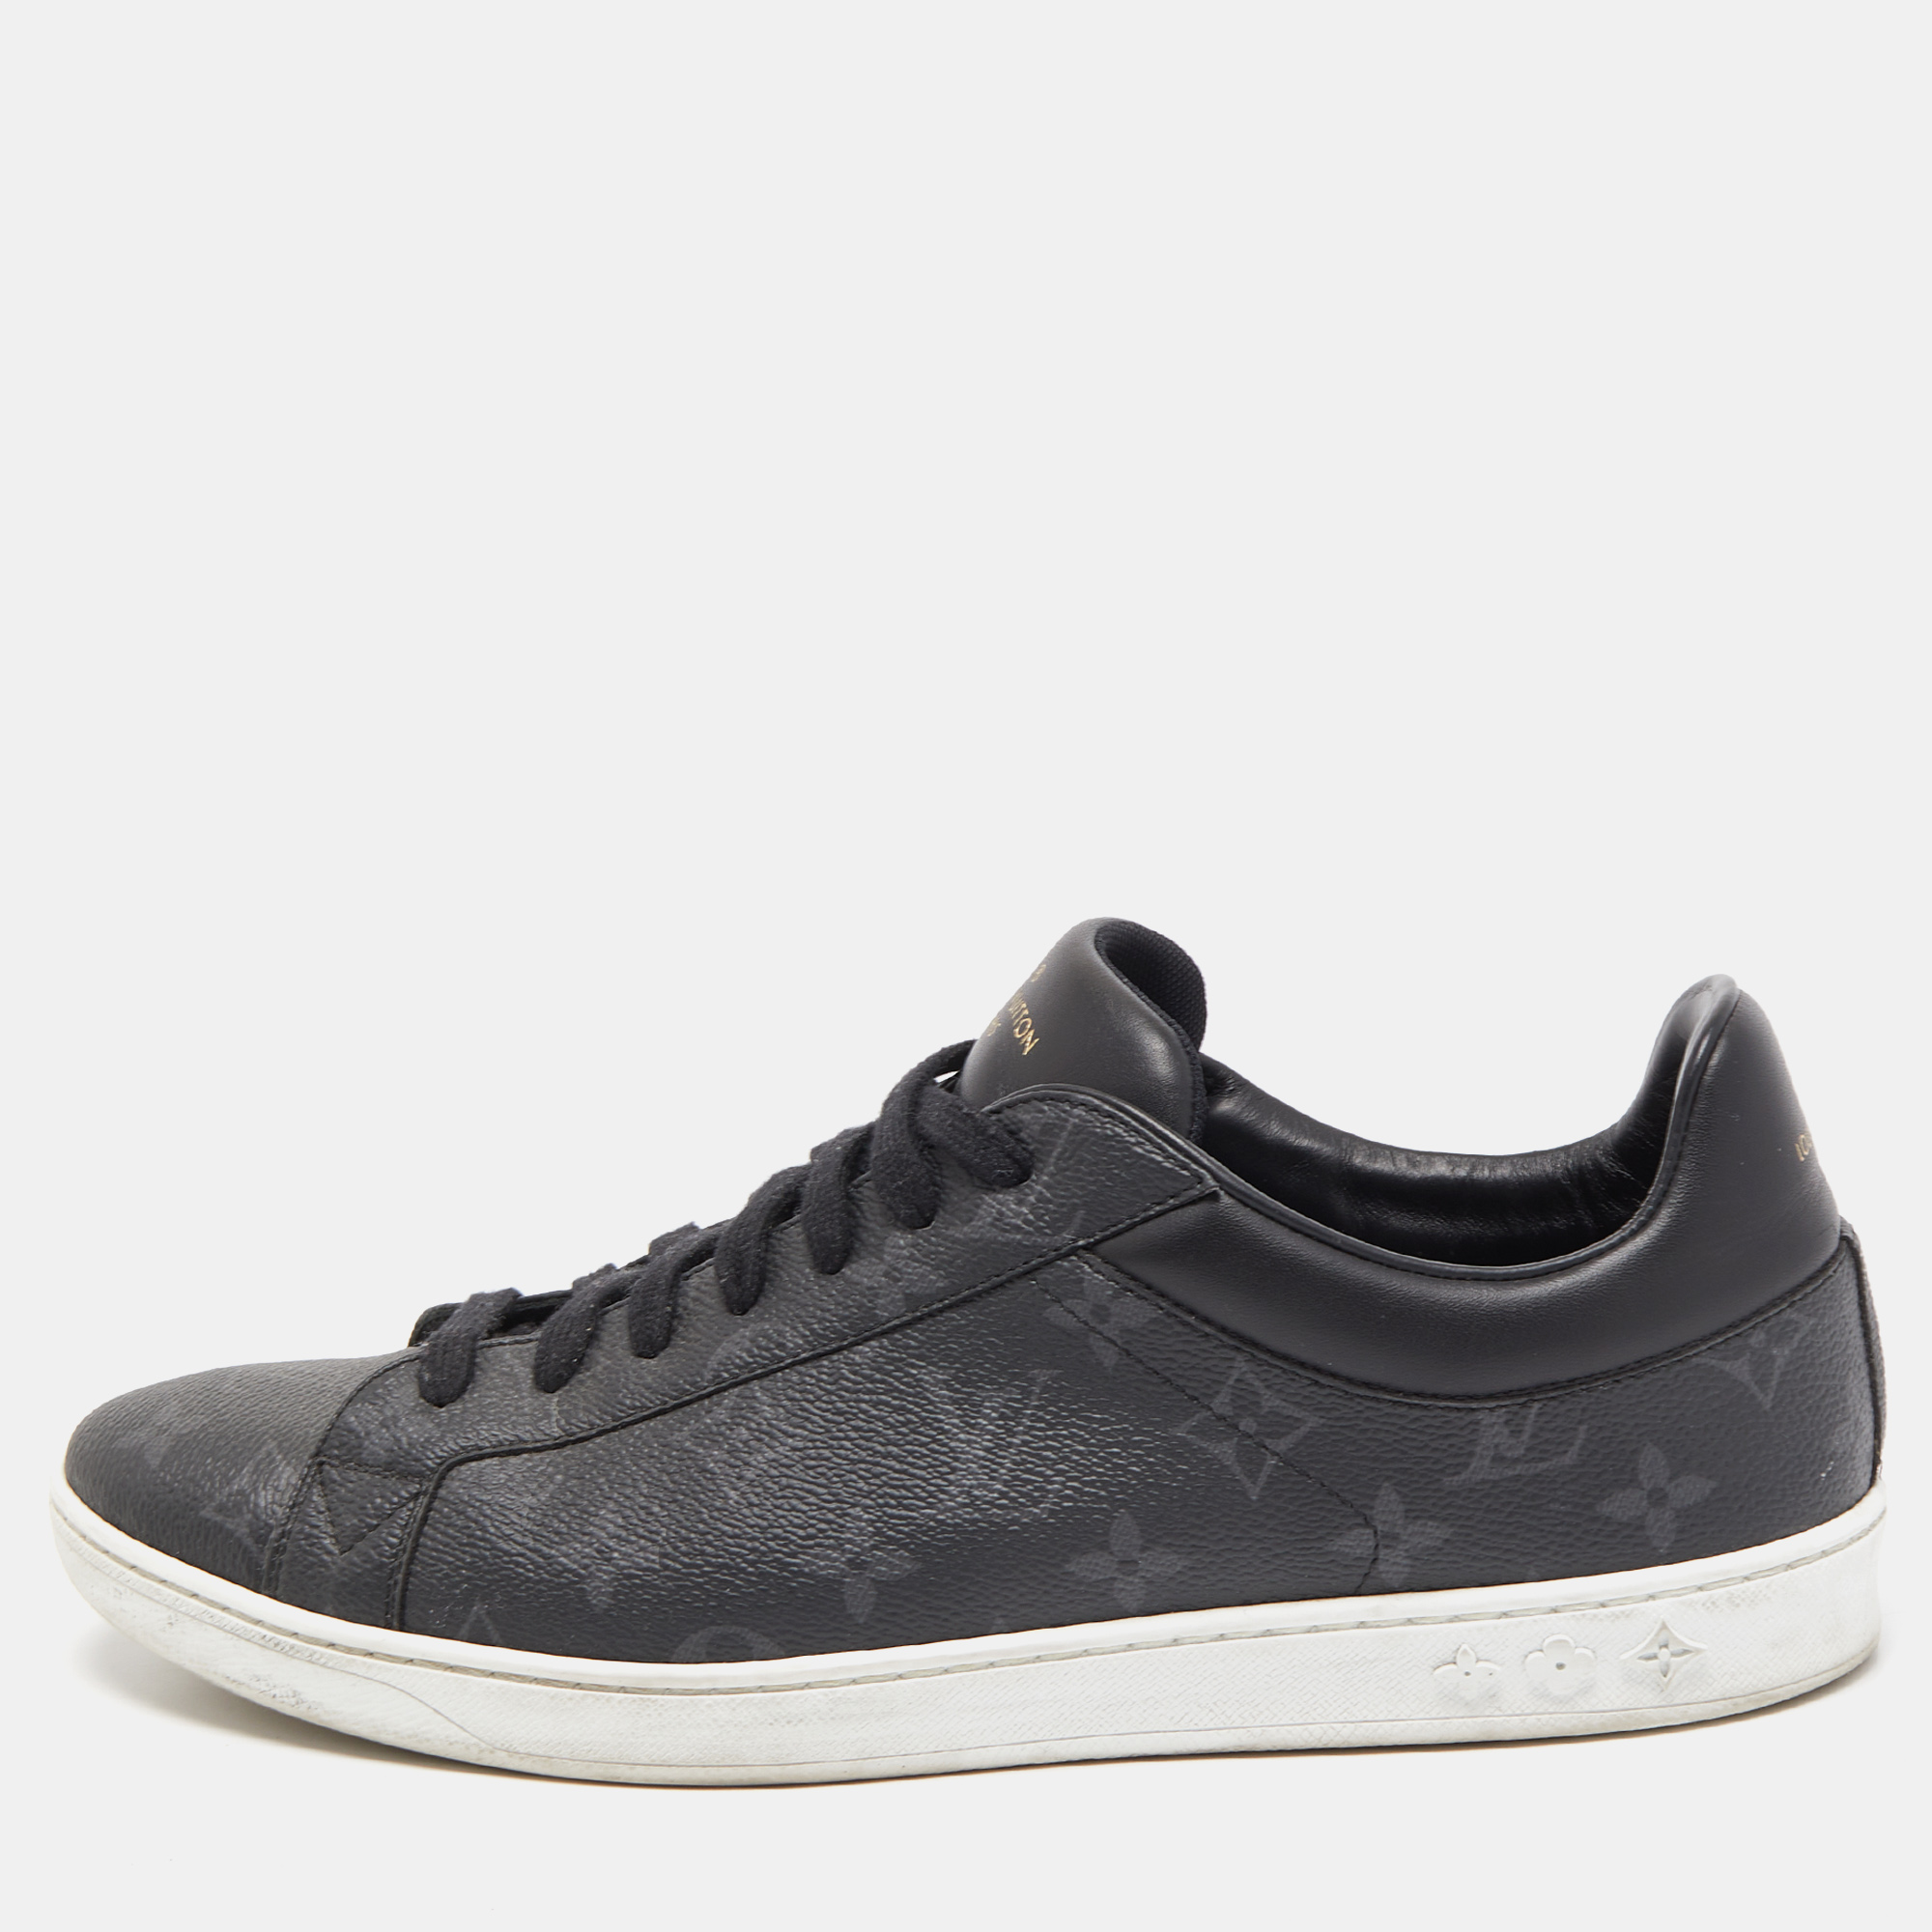 Pre-owned Louis Vuitton Black Monogram Leather Eclipse Frontrow Low Top  Trainers Size 43.5